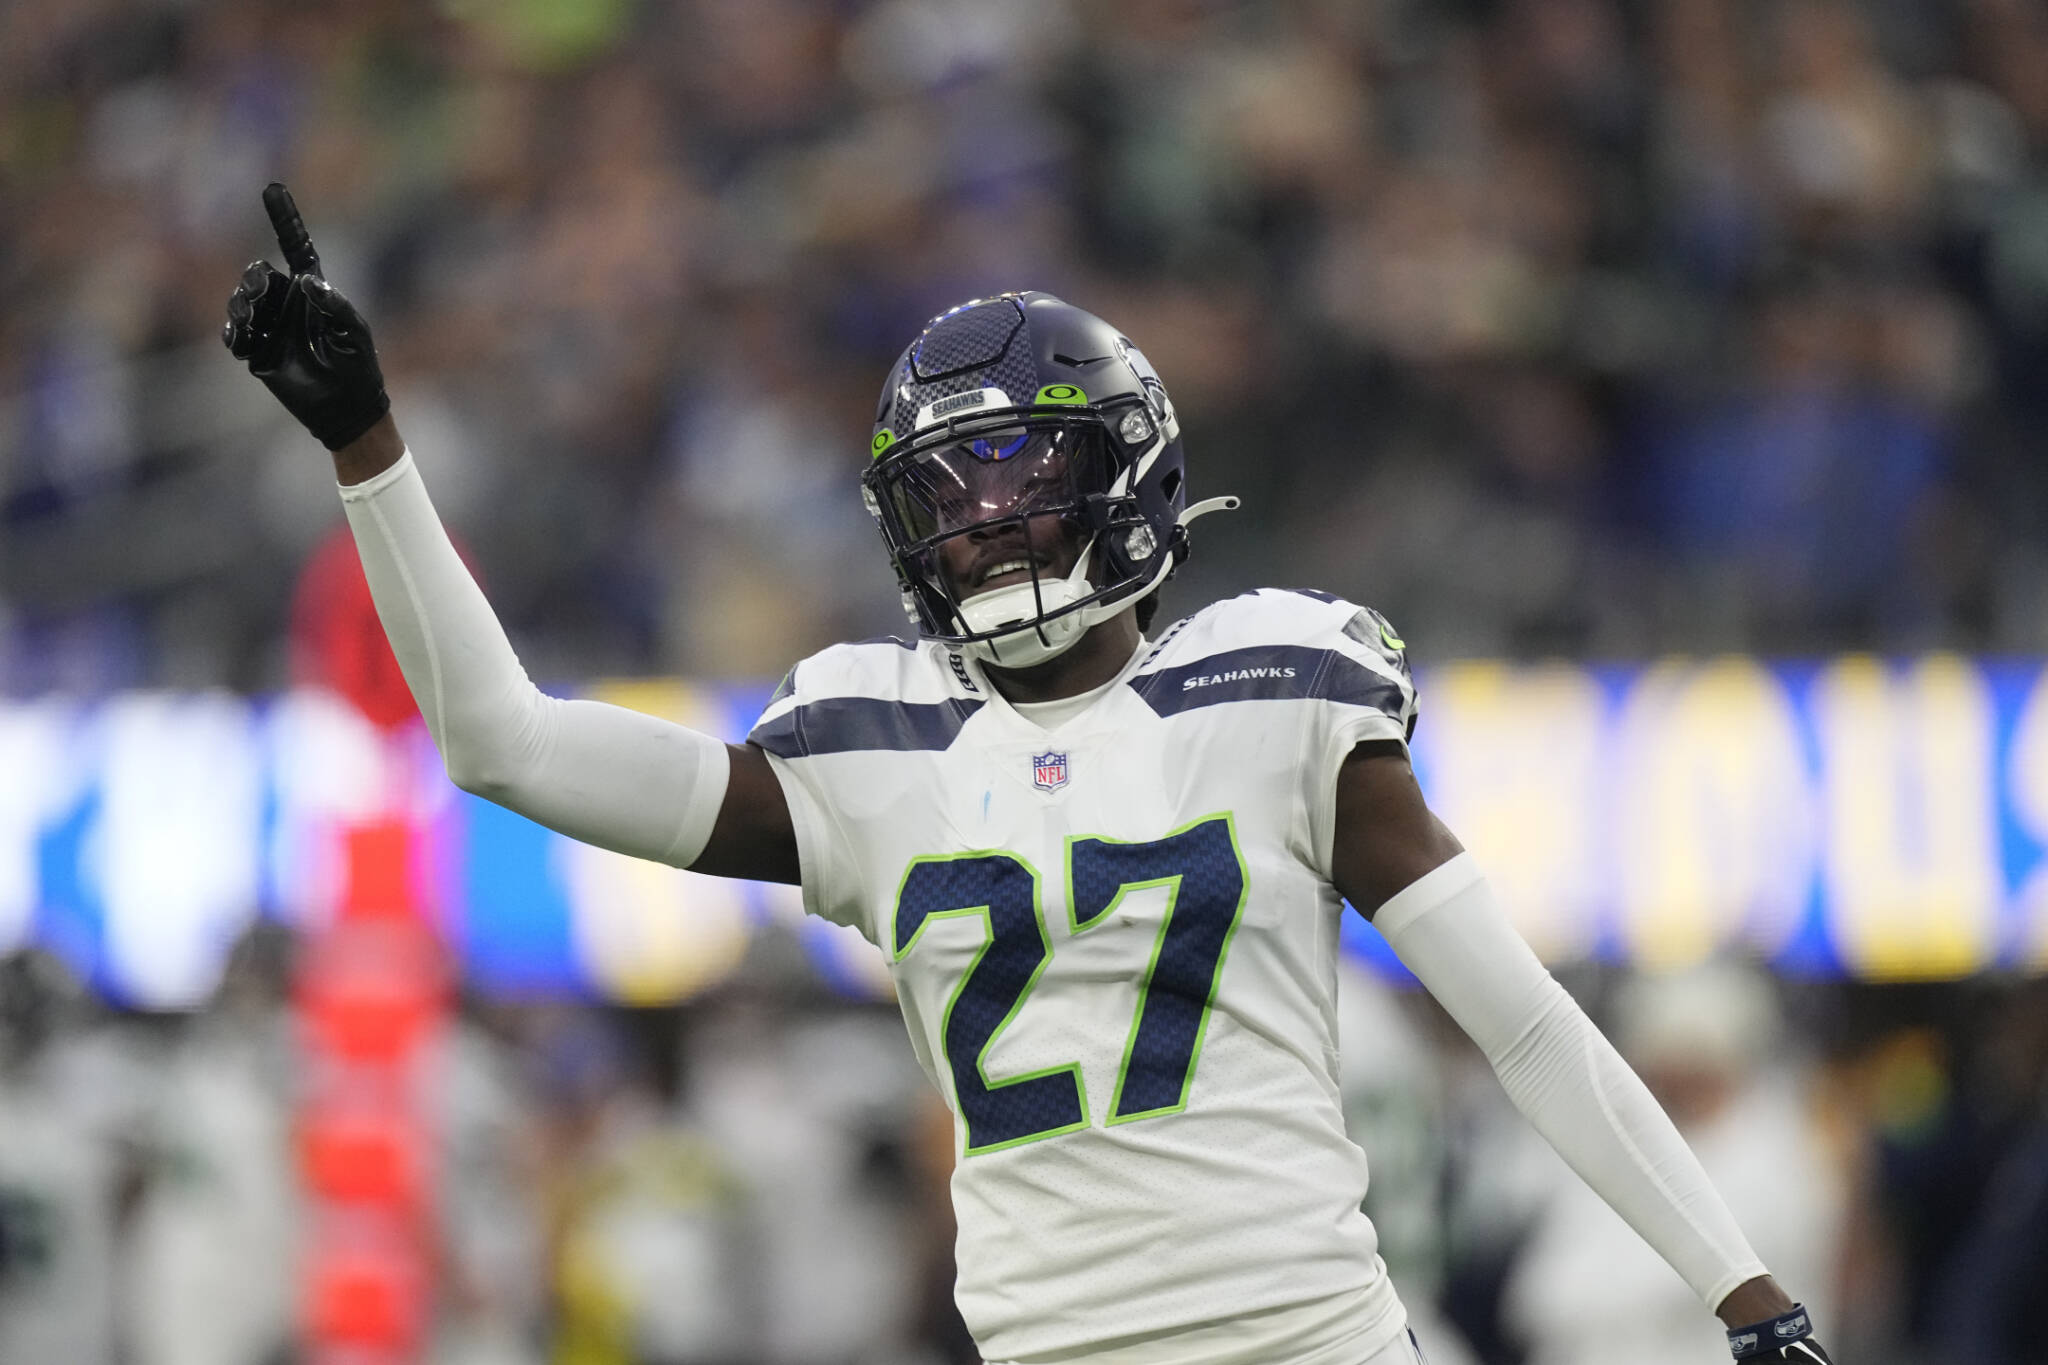 Smith, Woolen among 4 Seahawks elected to Pro Bowl HeraldNet